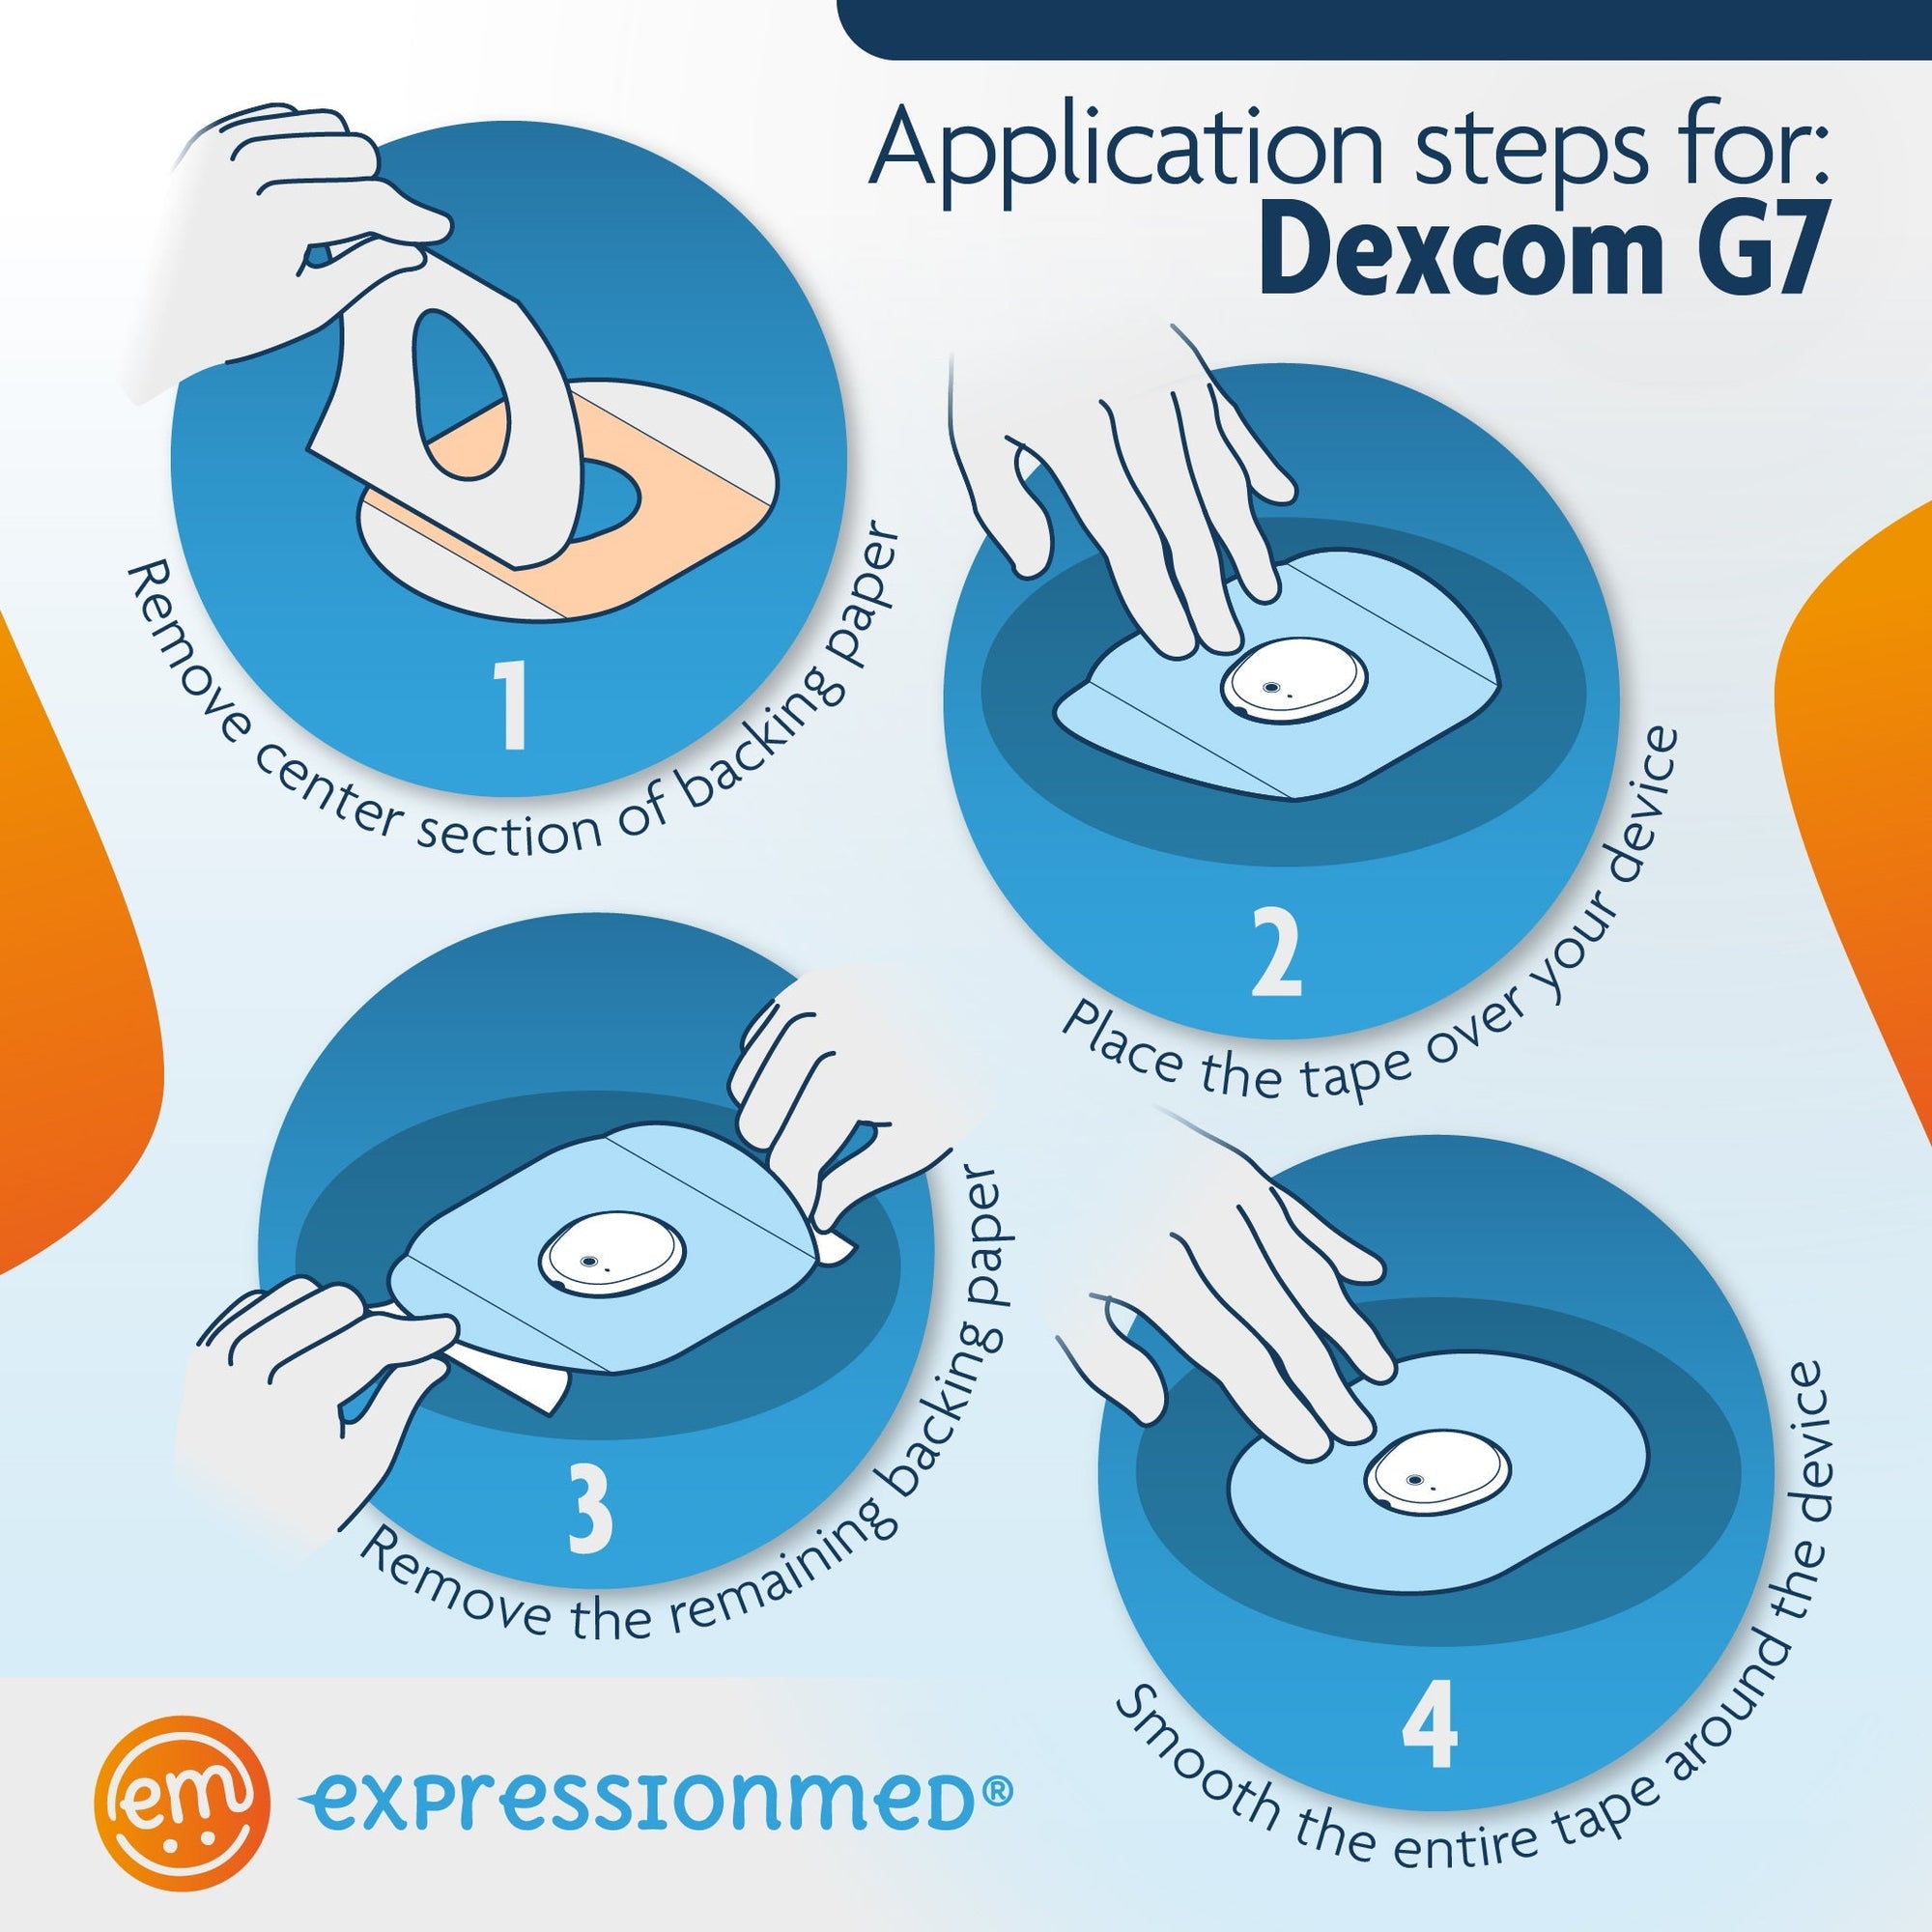 Application InstructionsApplication Instructions. 1. Prep skin with soap and water. 2. Remove Middle Section and lay center hole over device. 3. Peel off both end sections and smooth down on skin. To remove, hold an edge and strech material off skin., Dexcom Stelo Glucose Biosensor System